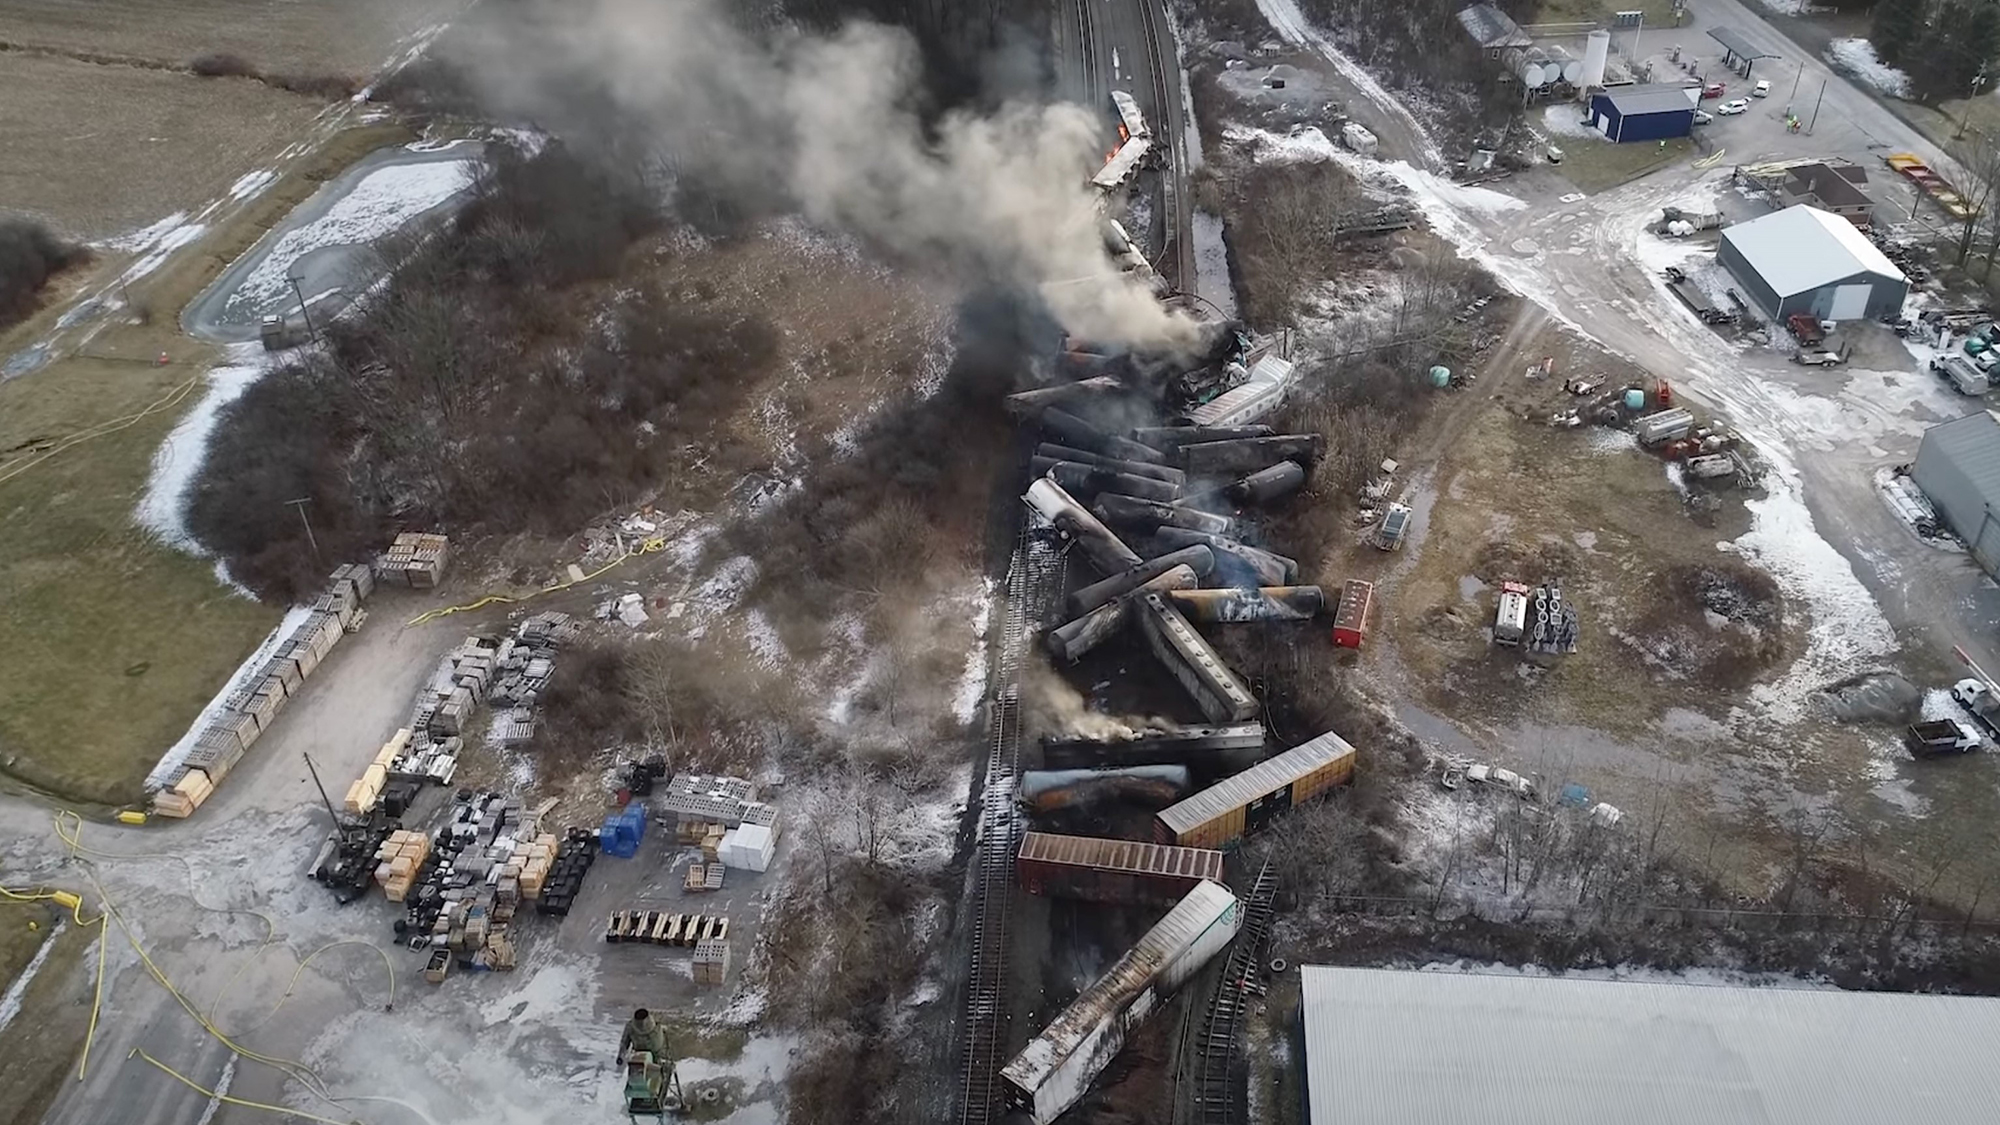 This video screenshot released by the U.S. National Transportation Safety Board (NTSB) shows the site of a derailed freight train in East Palestine, Ohio, the United States. About 50 Norfolk Southern freight train cars derailed on the night of Feb. 3 in East Palestine, a town of 4,800 residents near the Ohio-Pennsylvania border, due to a mechanical problem on an axle of one of the vehicles. There were a total of 20 hazardous material cars in the train consist, 10 of which derailed, according to the NTSB, a U.S. government agency responsible for civil transportation accident investigation.